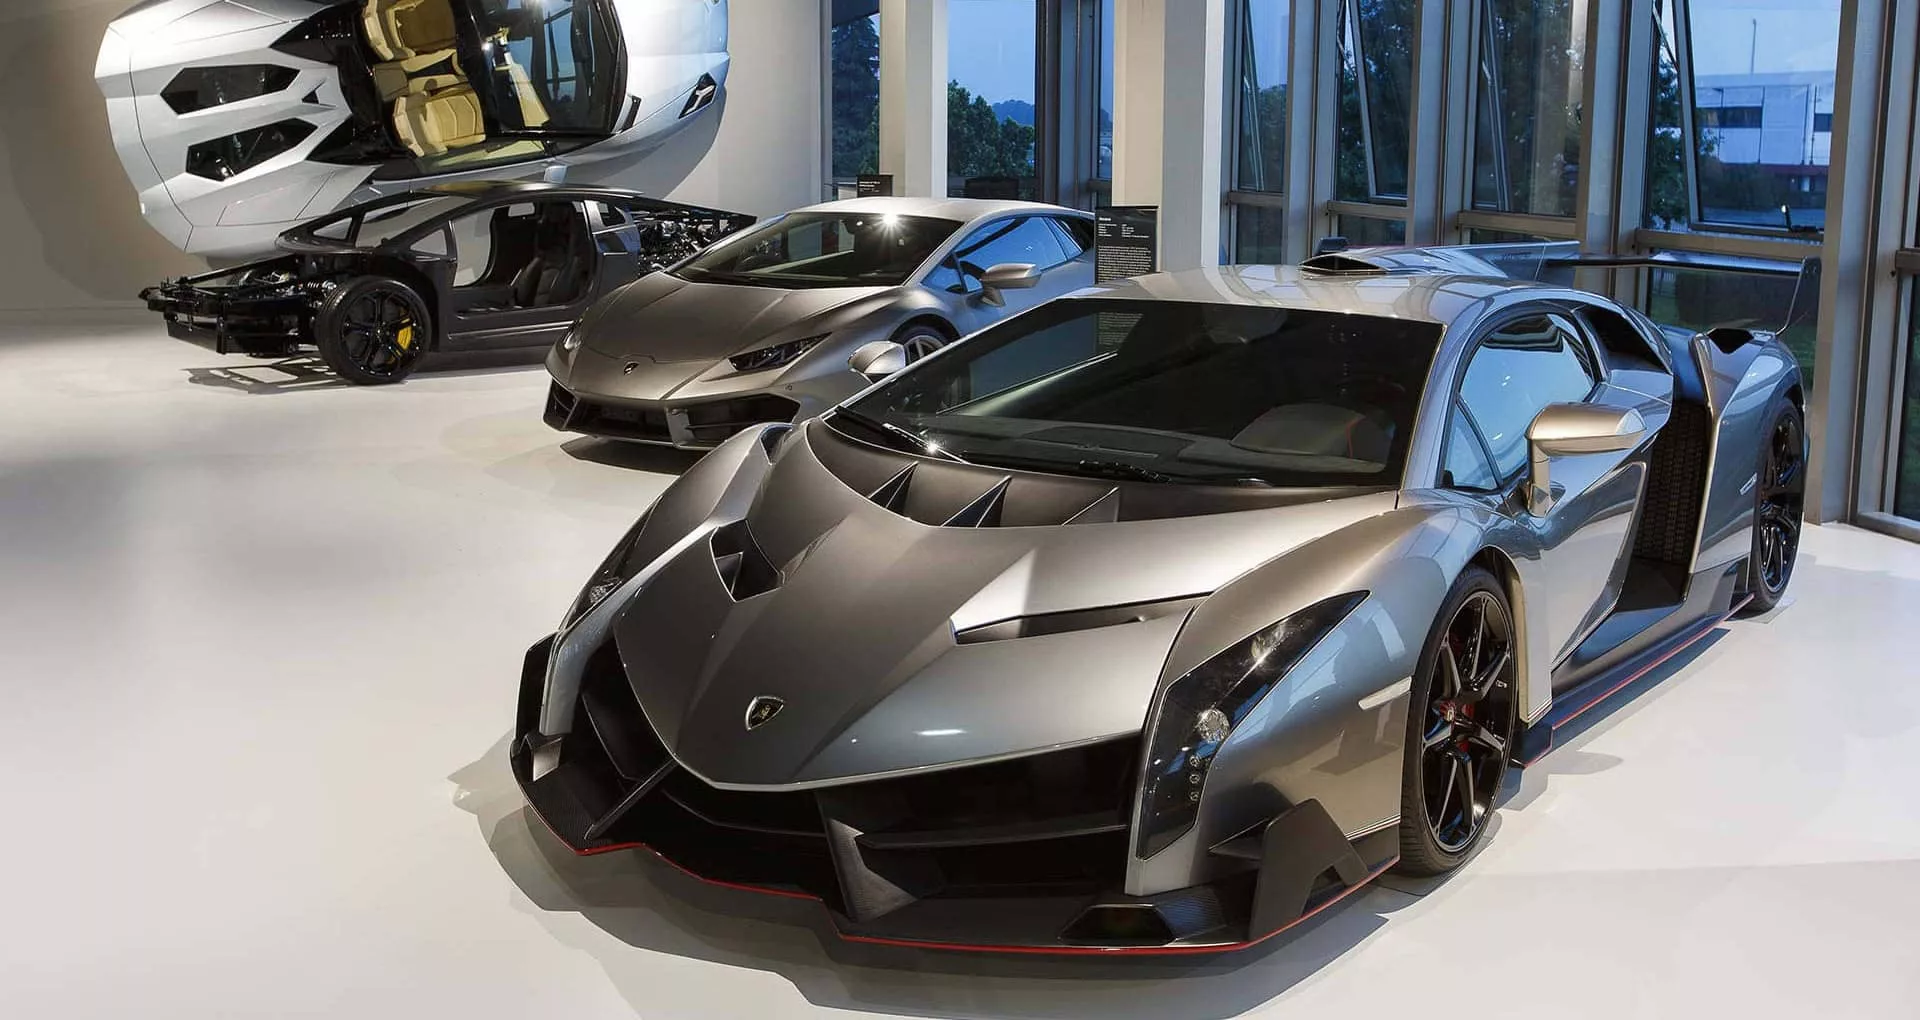 Lamborghini Museum in Italy, Europe | Museums - Rated 3.8